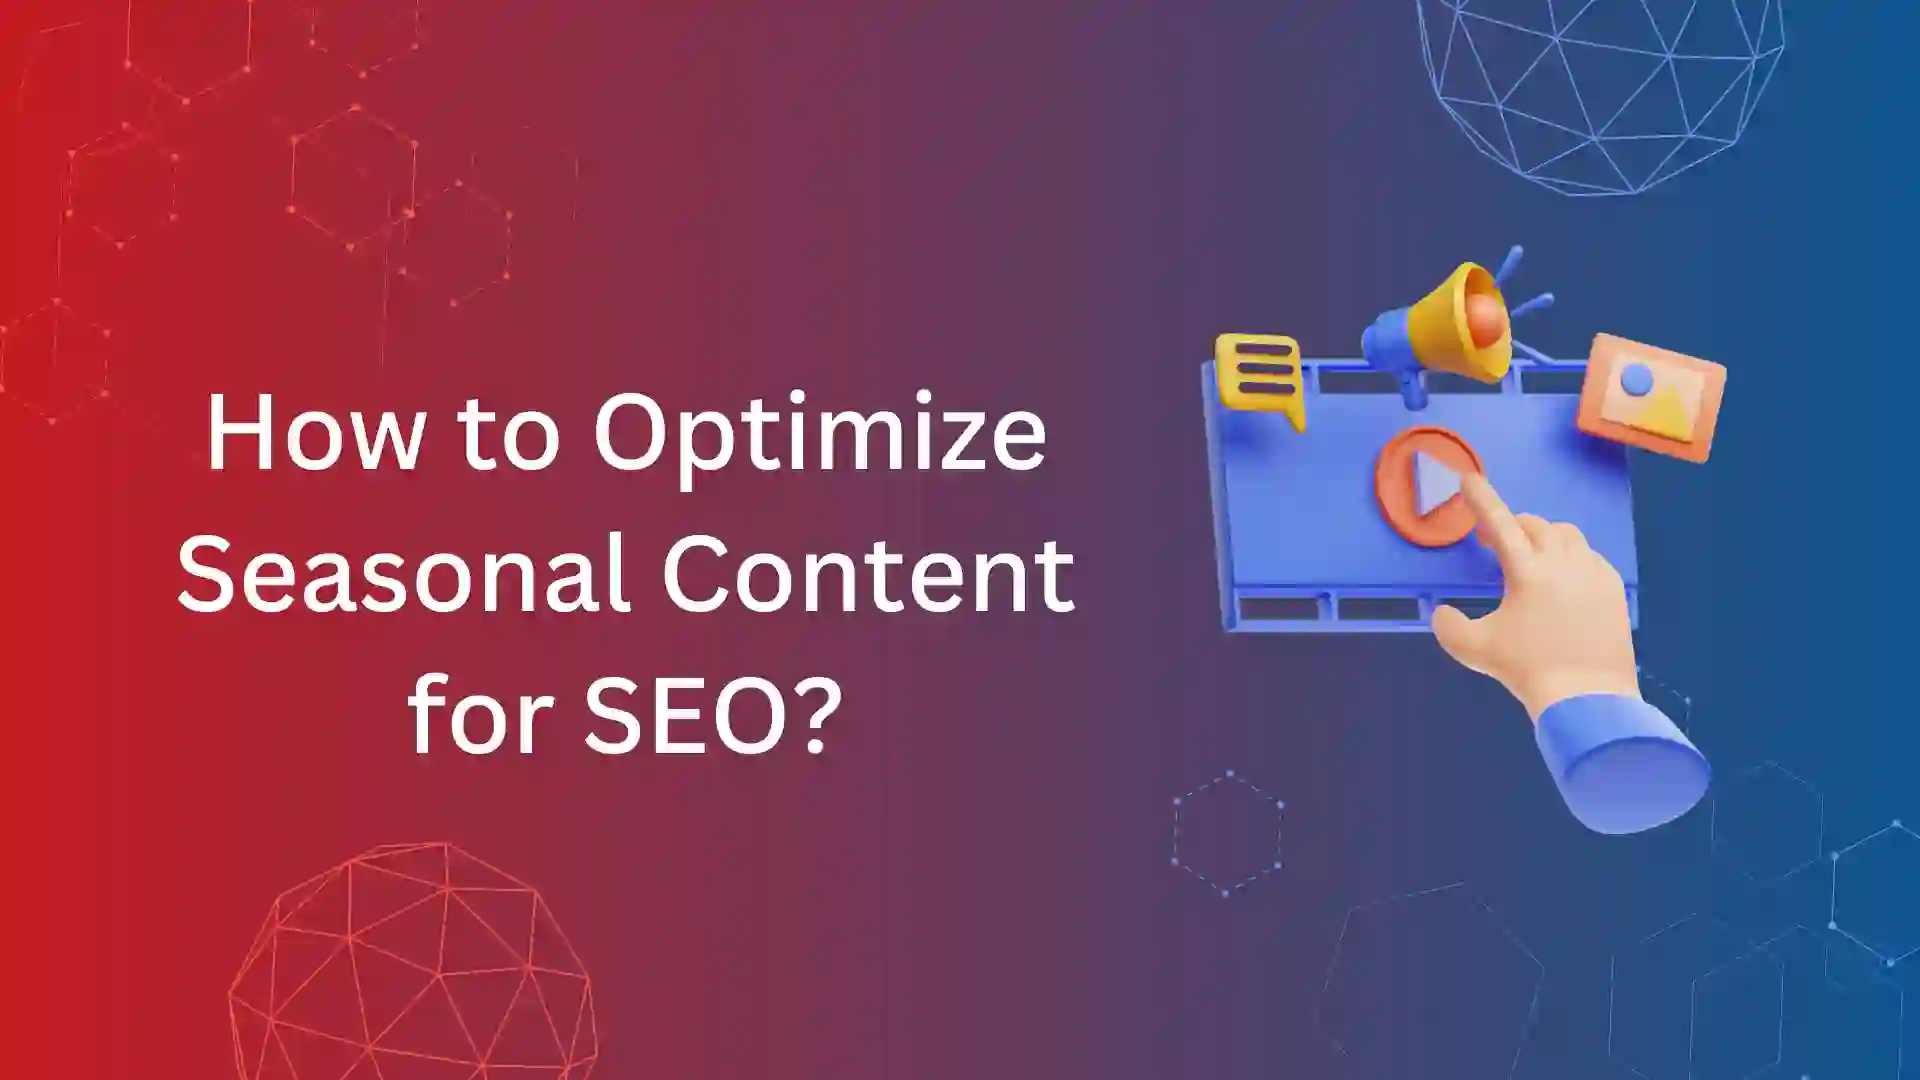 How to Optimize Seasonal Content for SEO